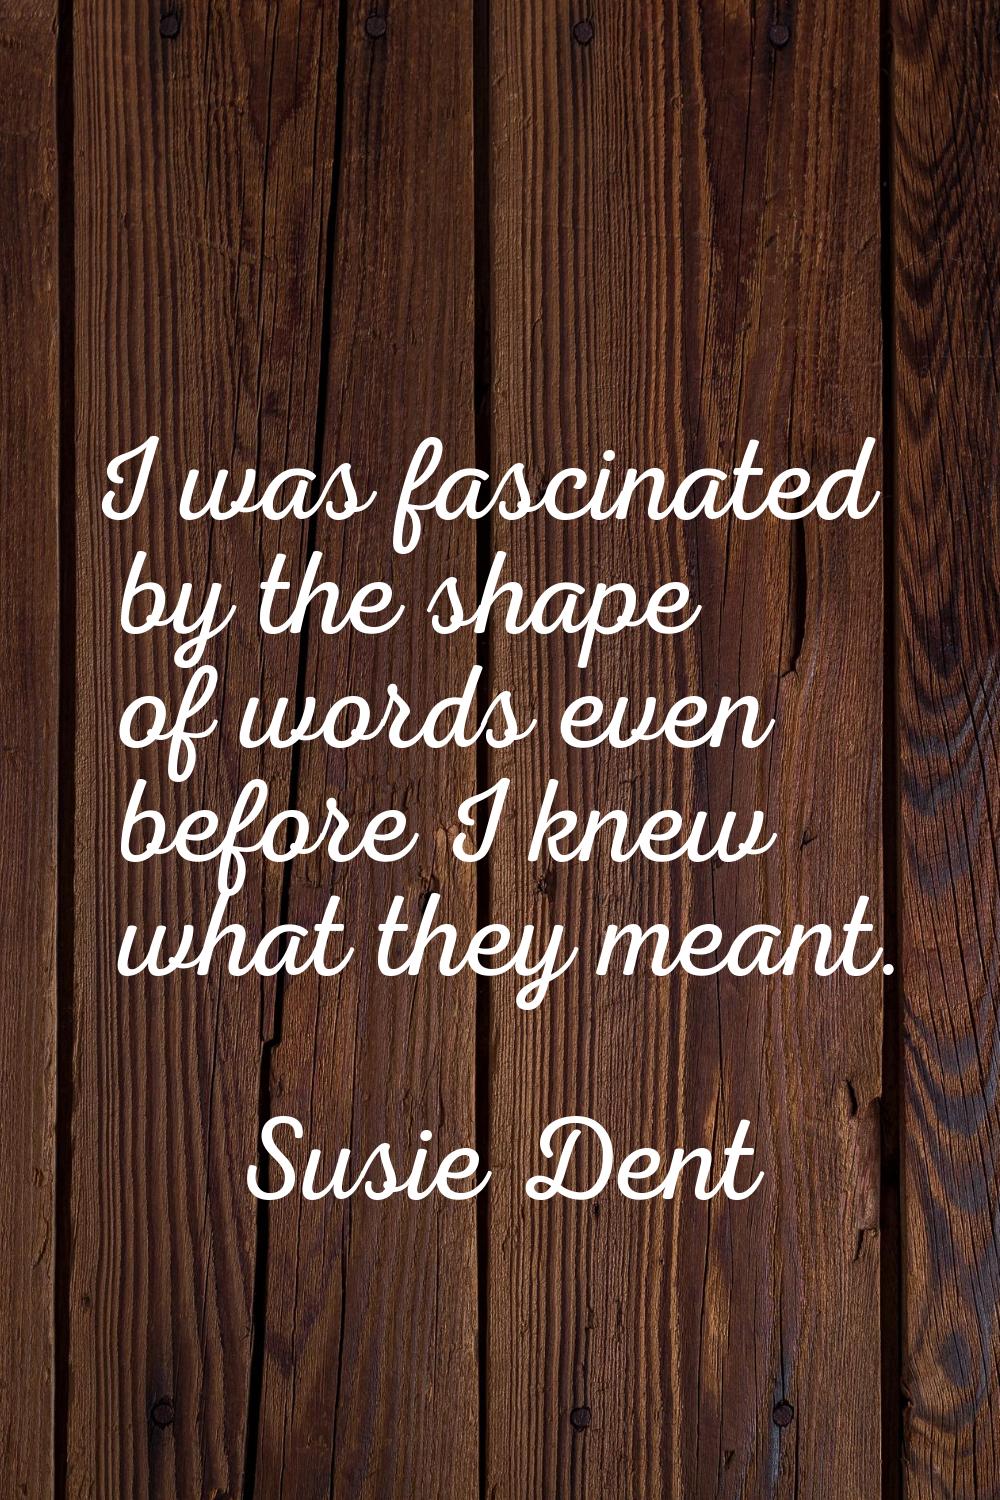 I was fascinated by the shape of words even before I knew what they meant.